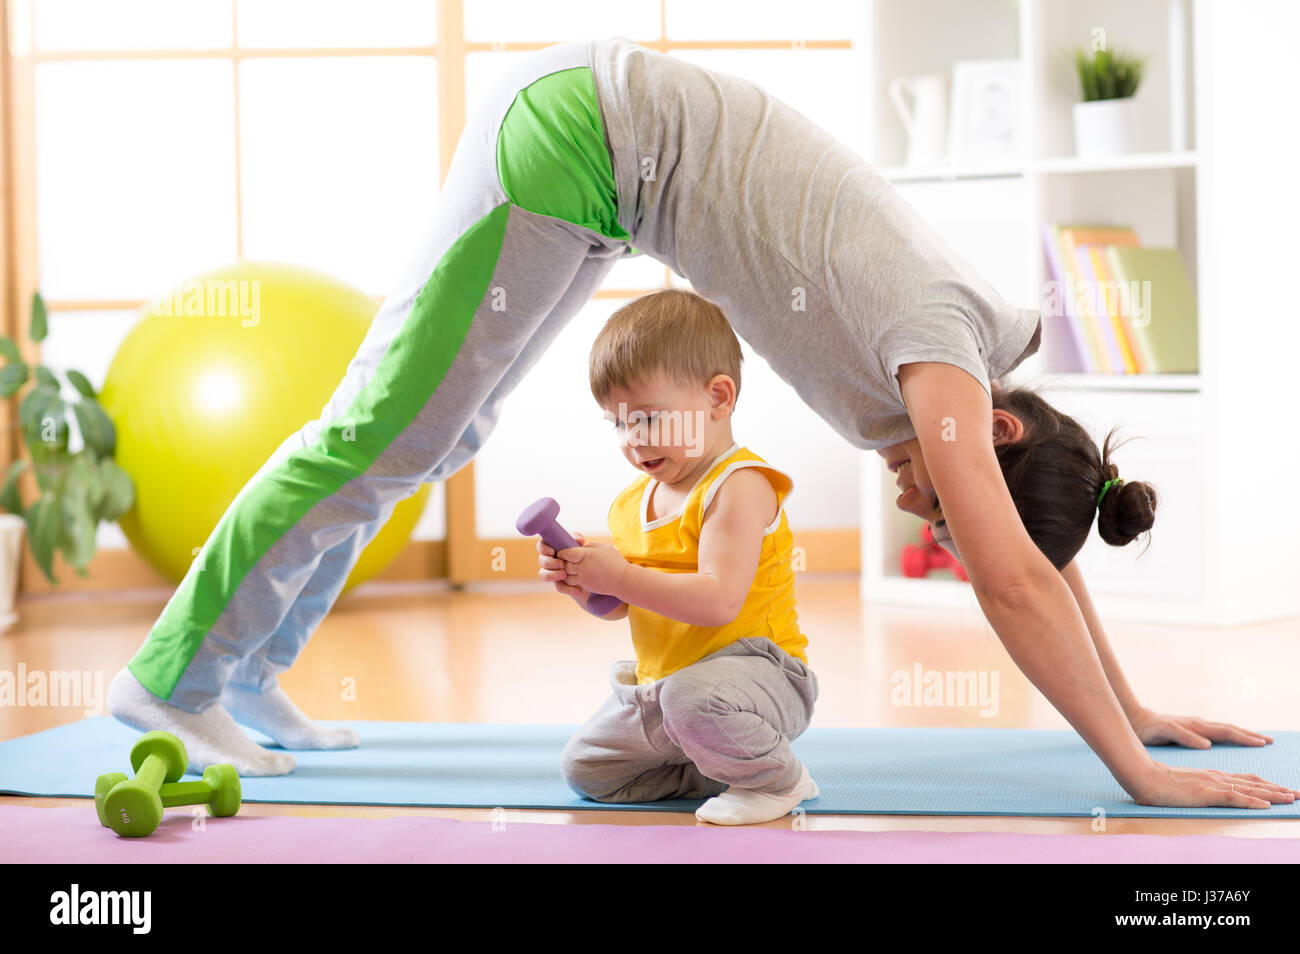 mother doing yoga or fitness exercises with baby Stock Photo